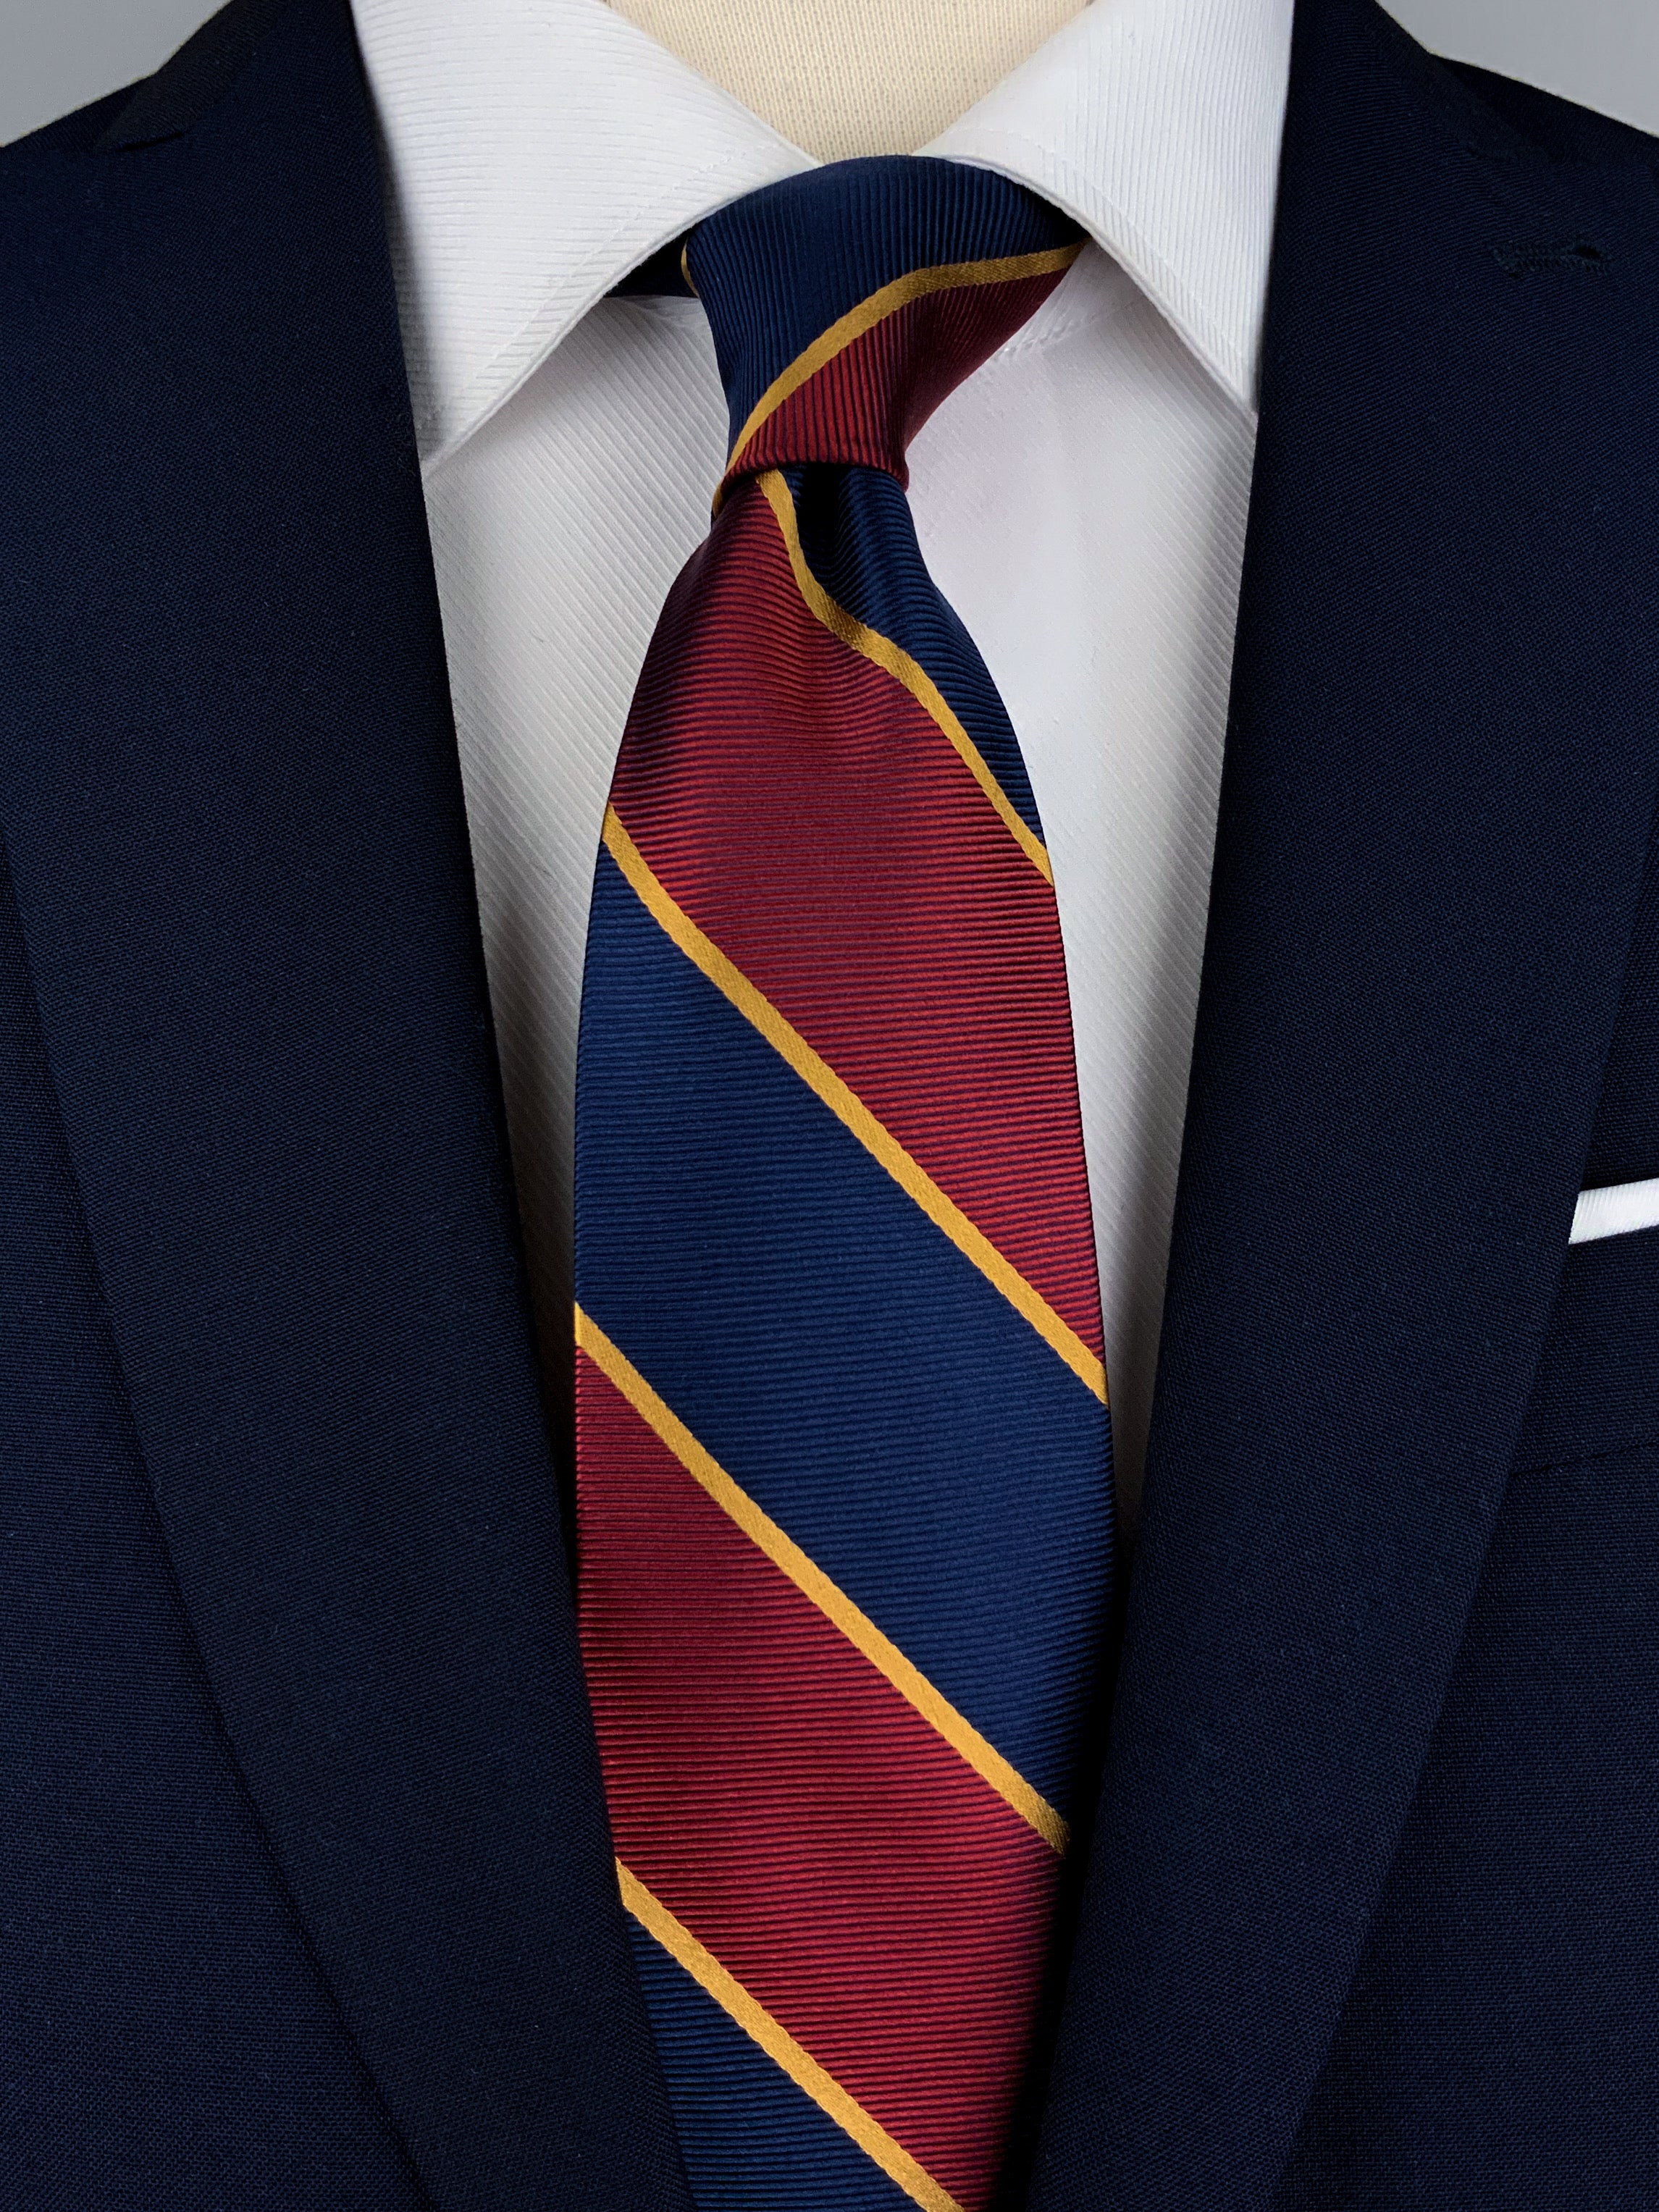 Mulberry silk twill regimental tie with navy blue and red diagonal stripes with woven gold detailing worn with a white shirt and a navy blue suit